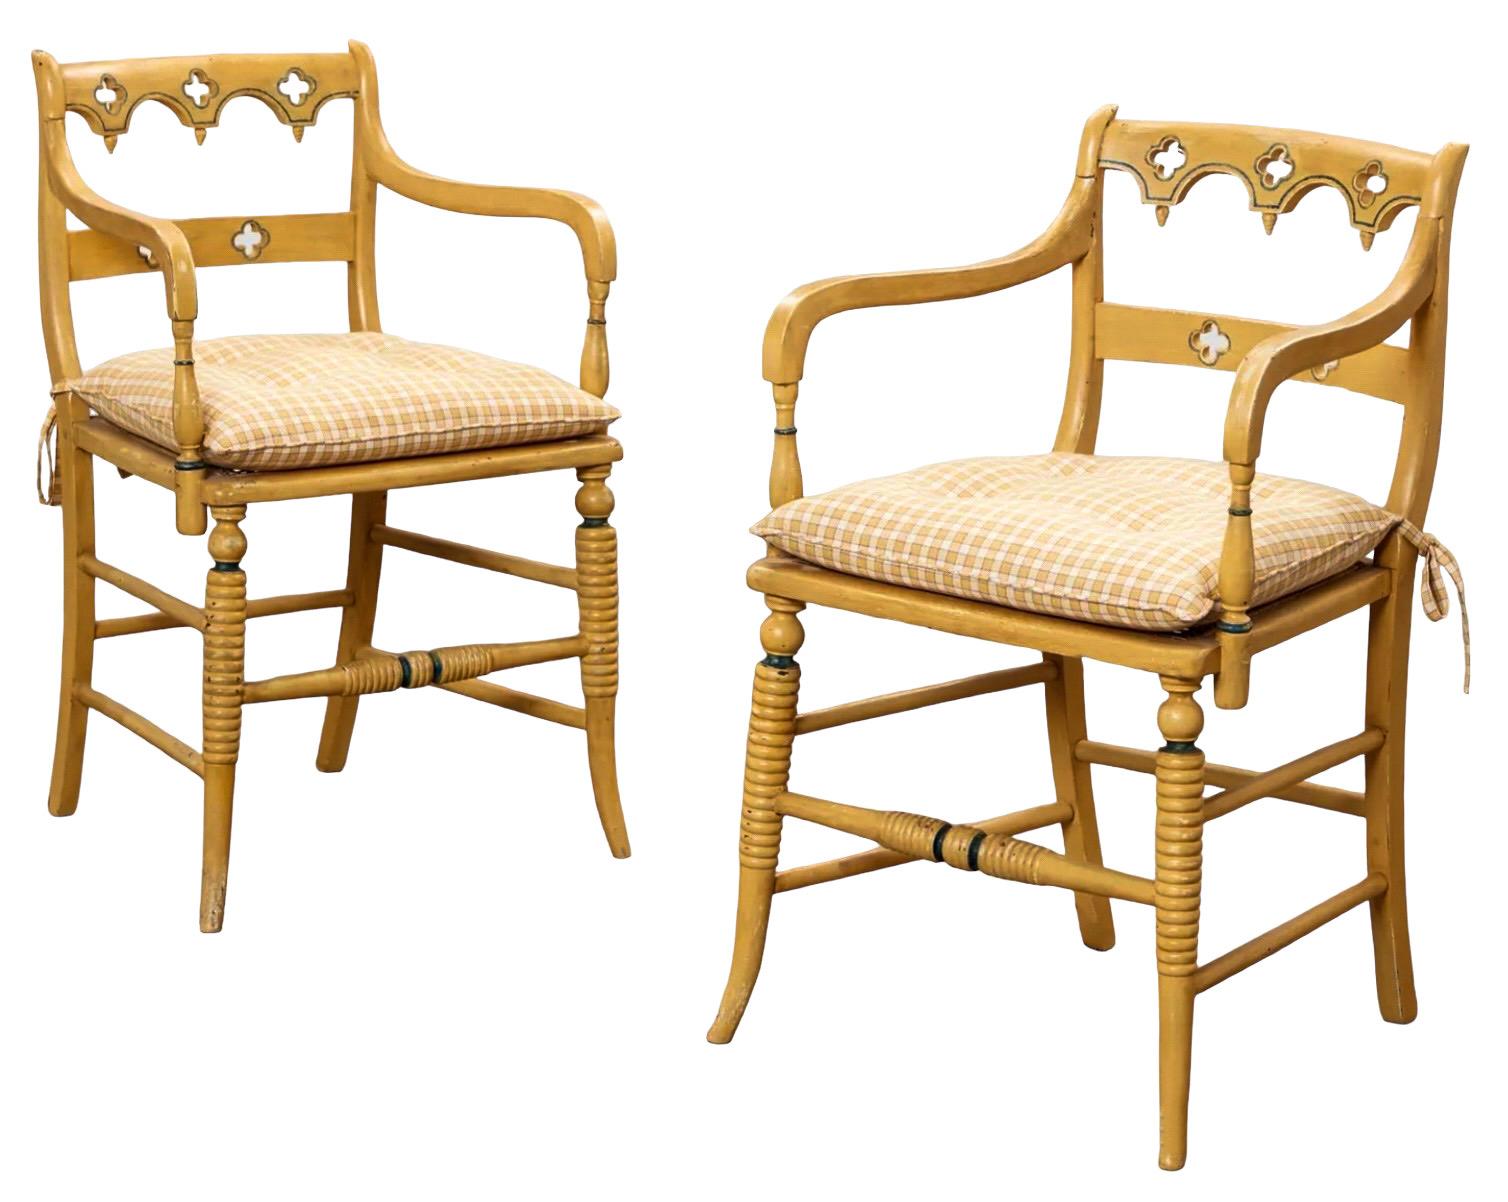 Early 20th-C. English Regency Style Carved & Painted Cane Bergere Chairs - Pair 1